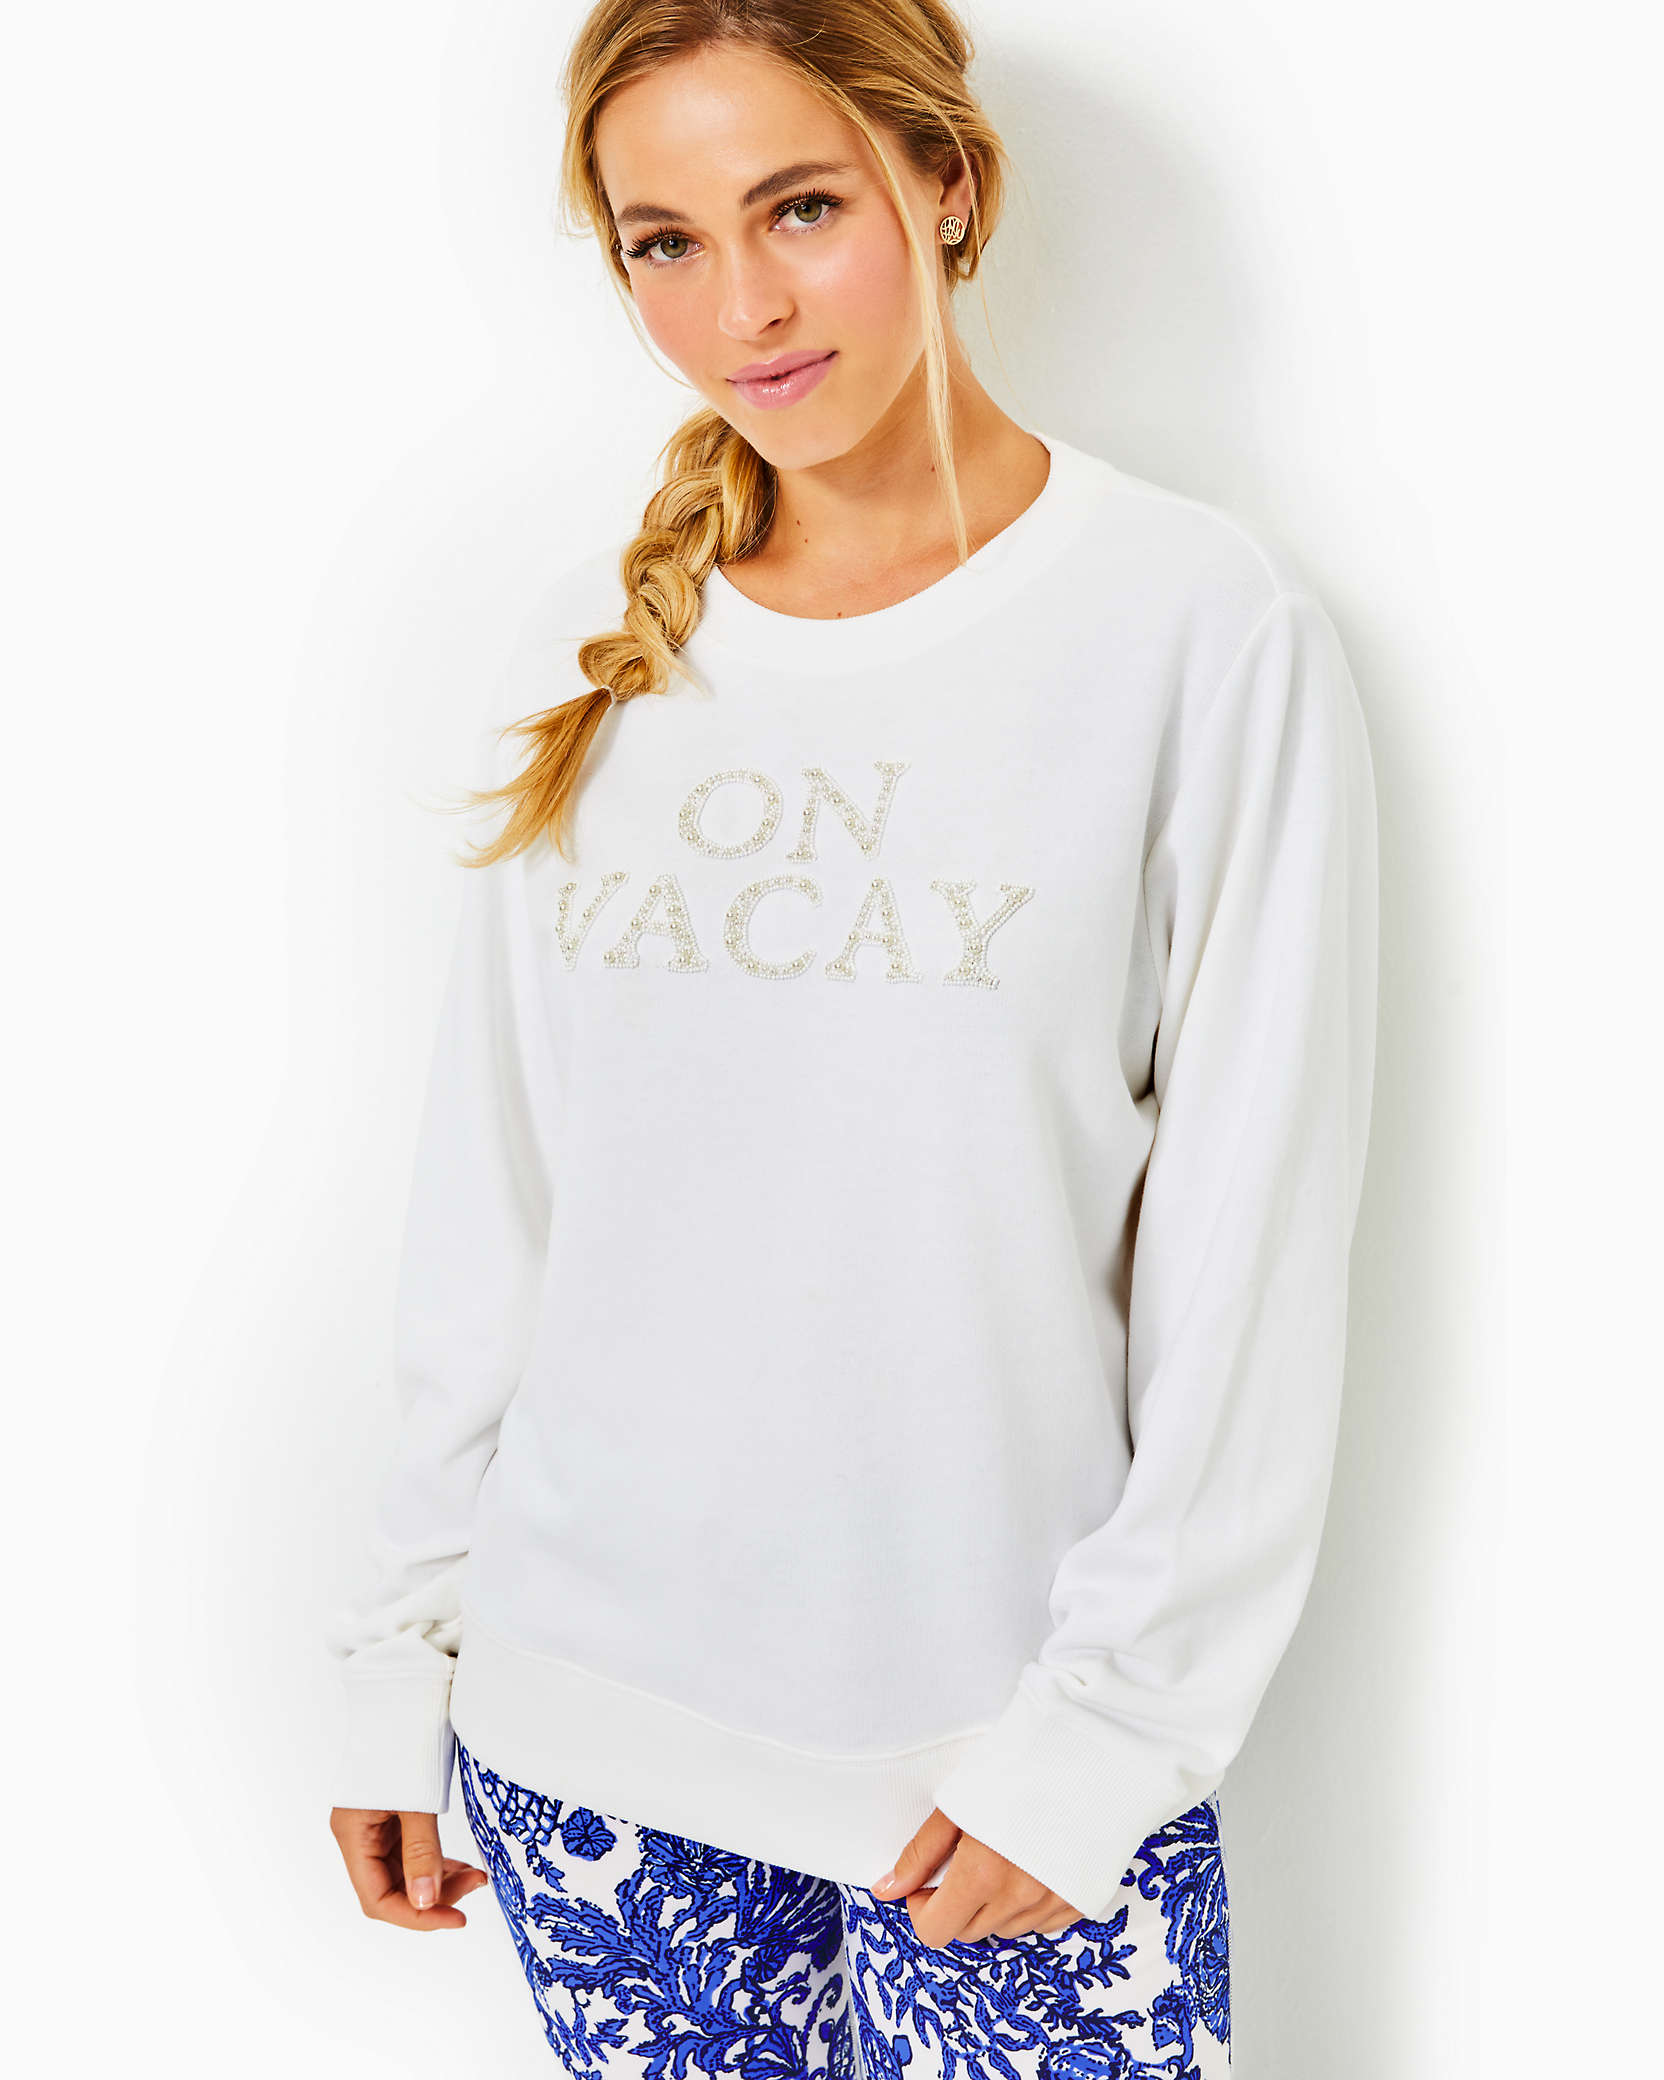 Lilly Pulitzer Ballad Cotton Sweatshirt In Resort White On Vacay Embellished Graphic